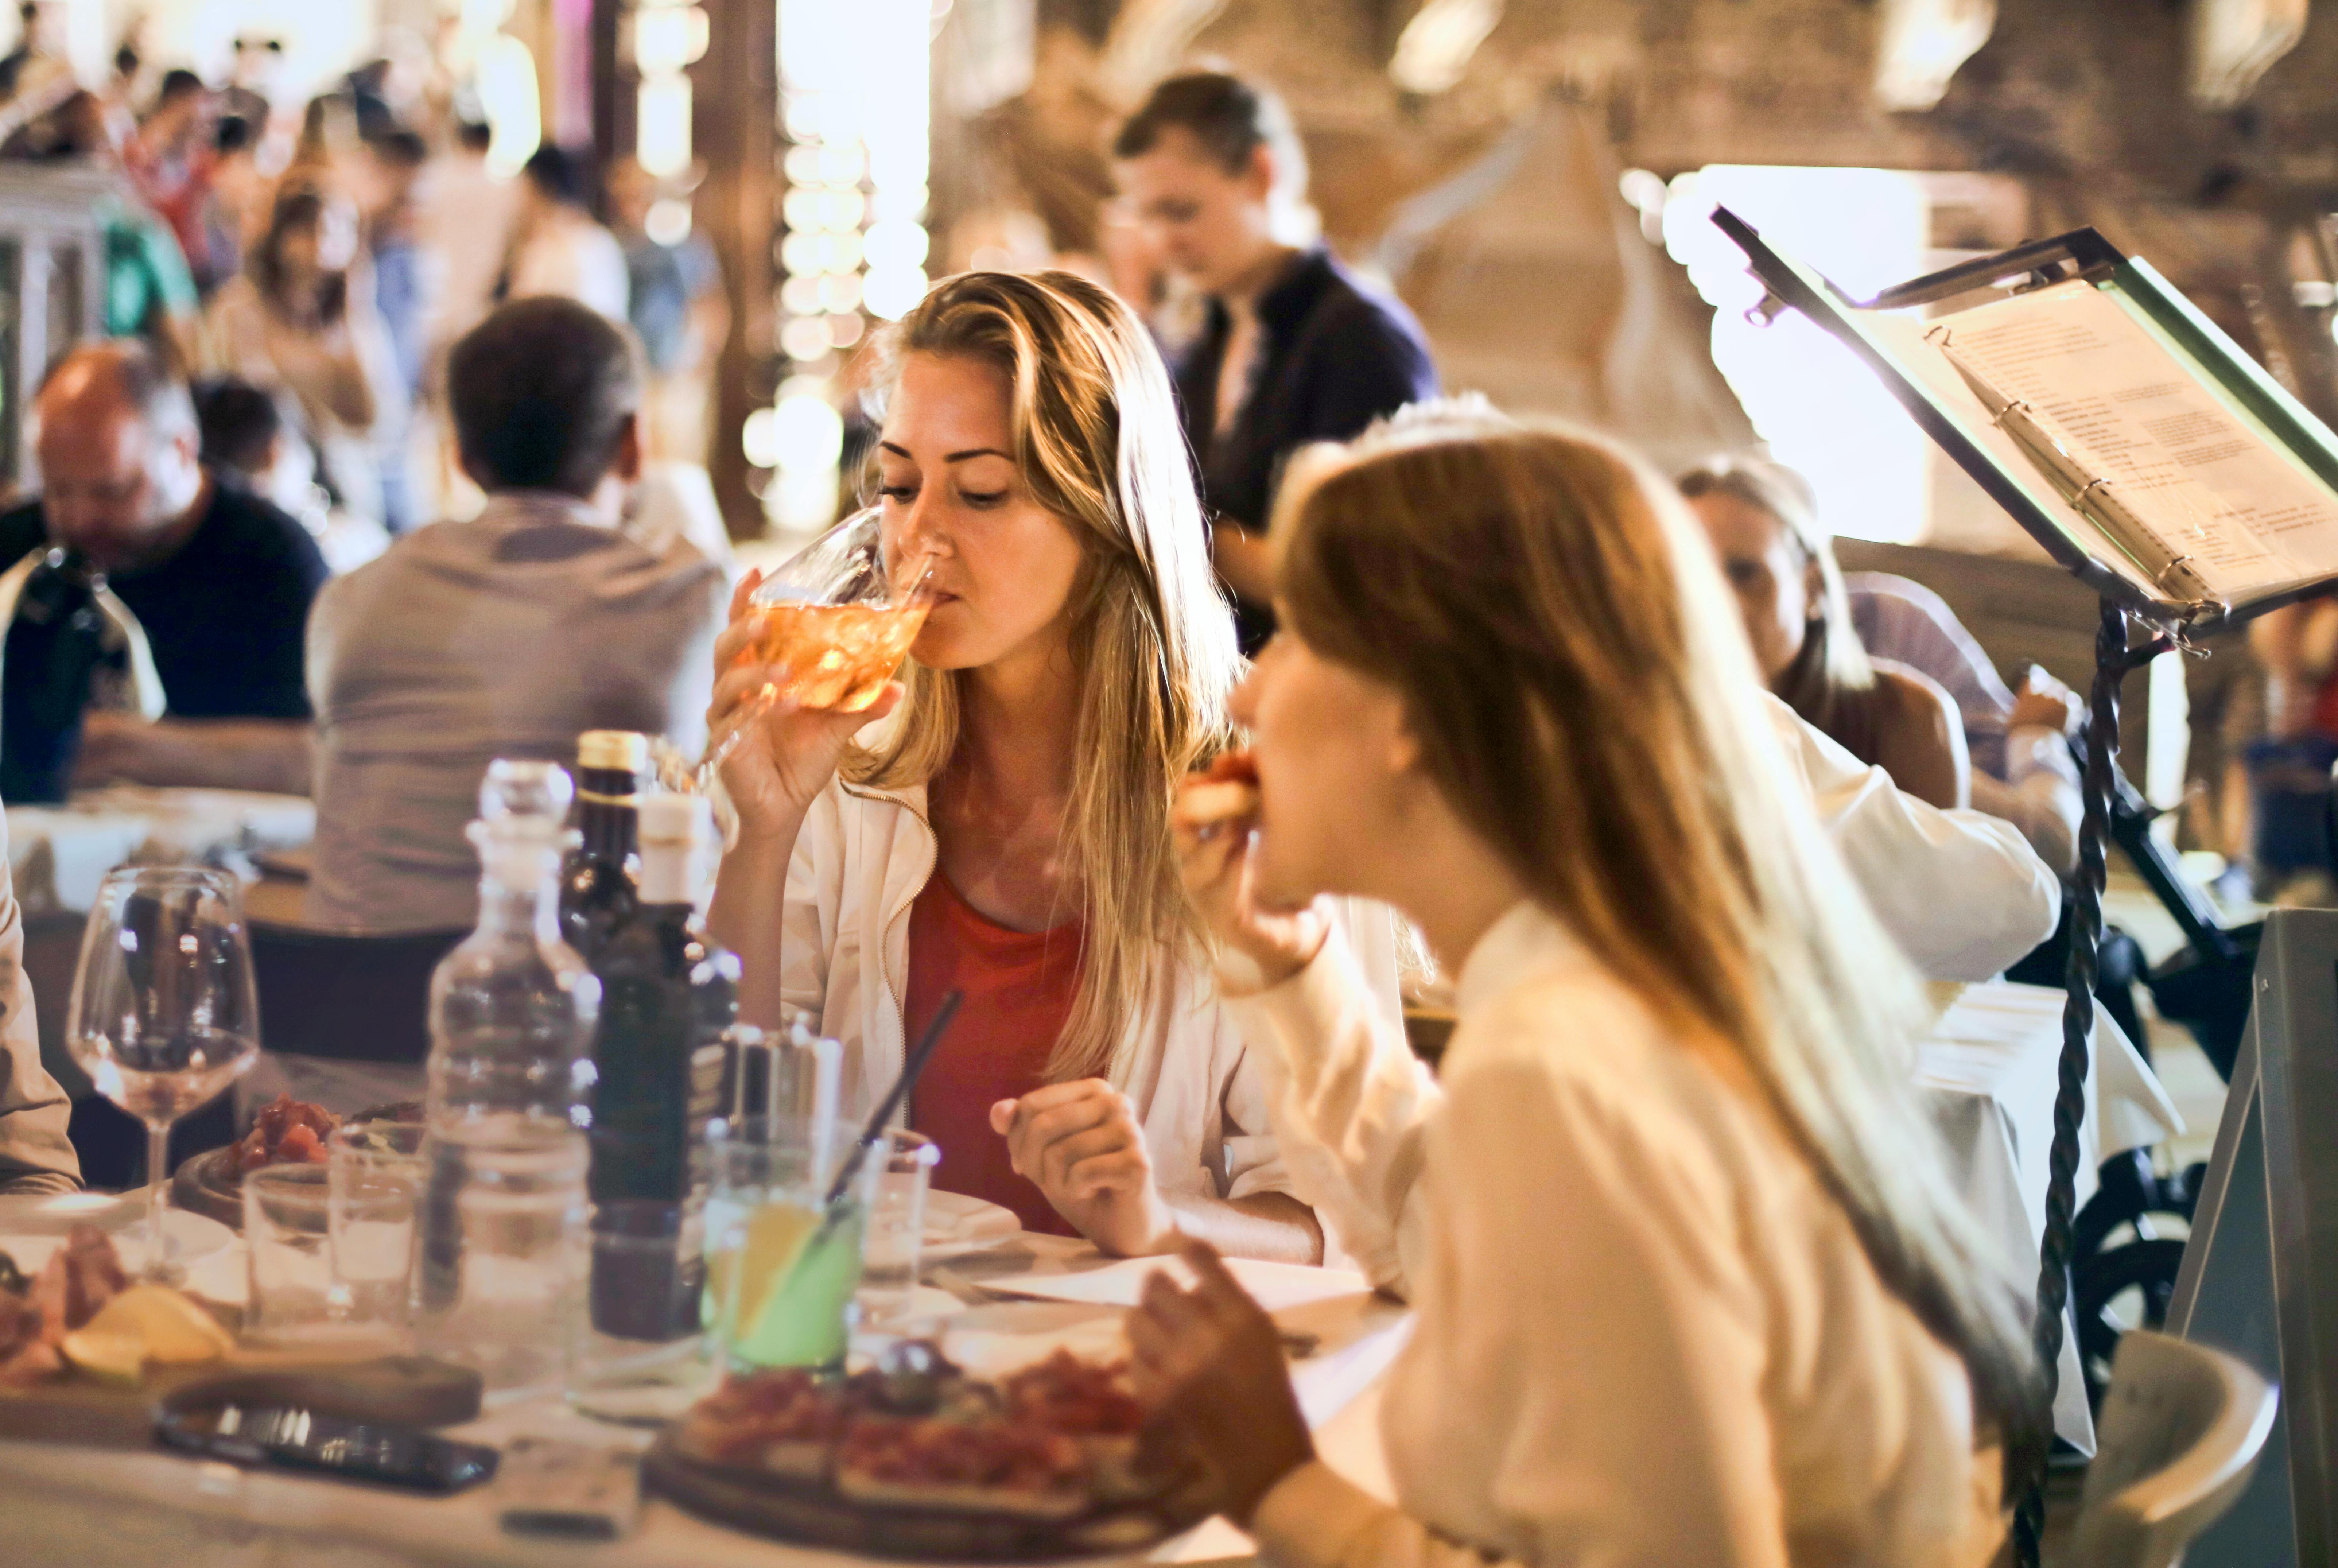 Two women eating in a restaurant | Source: Pexels